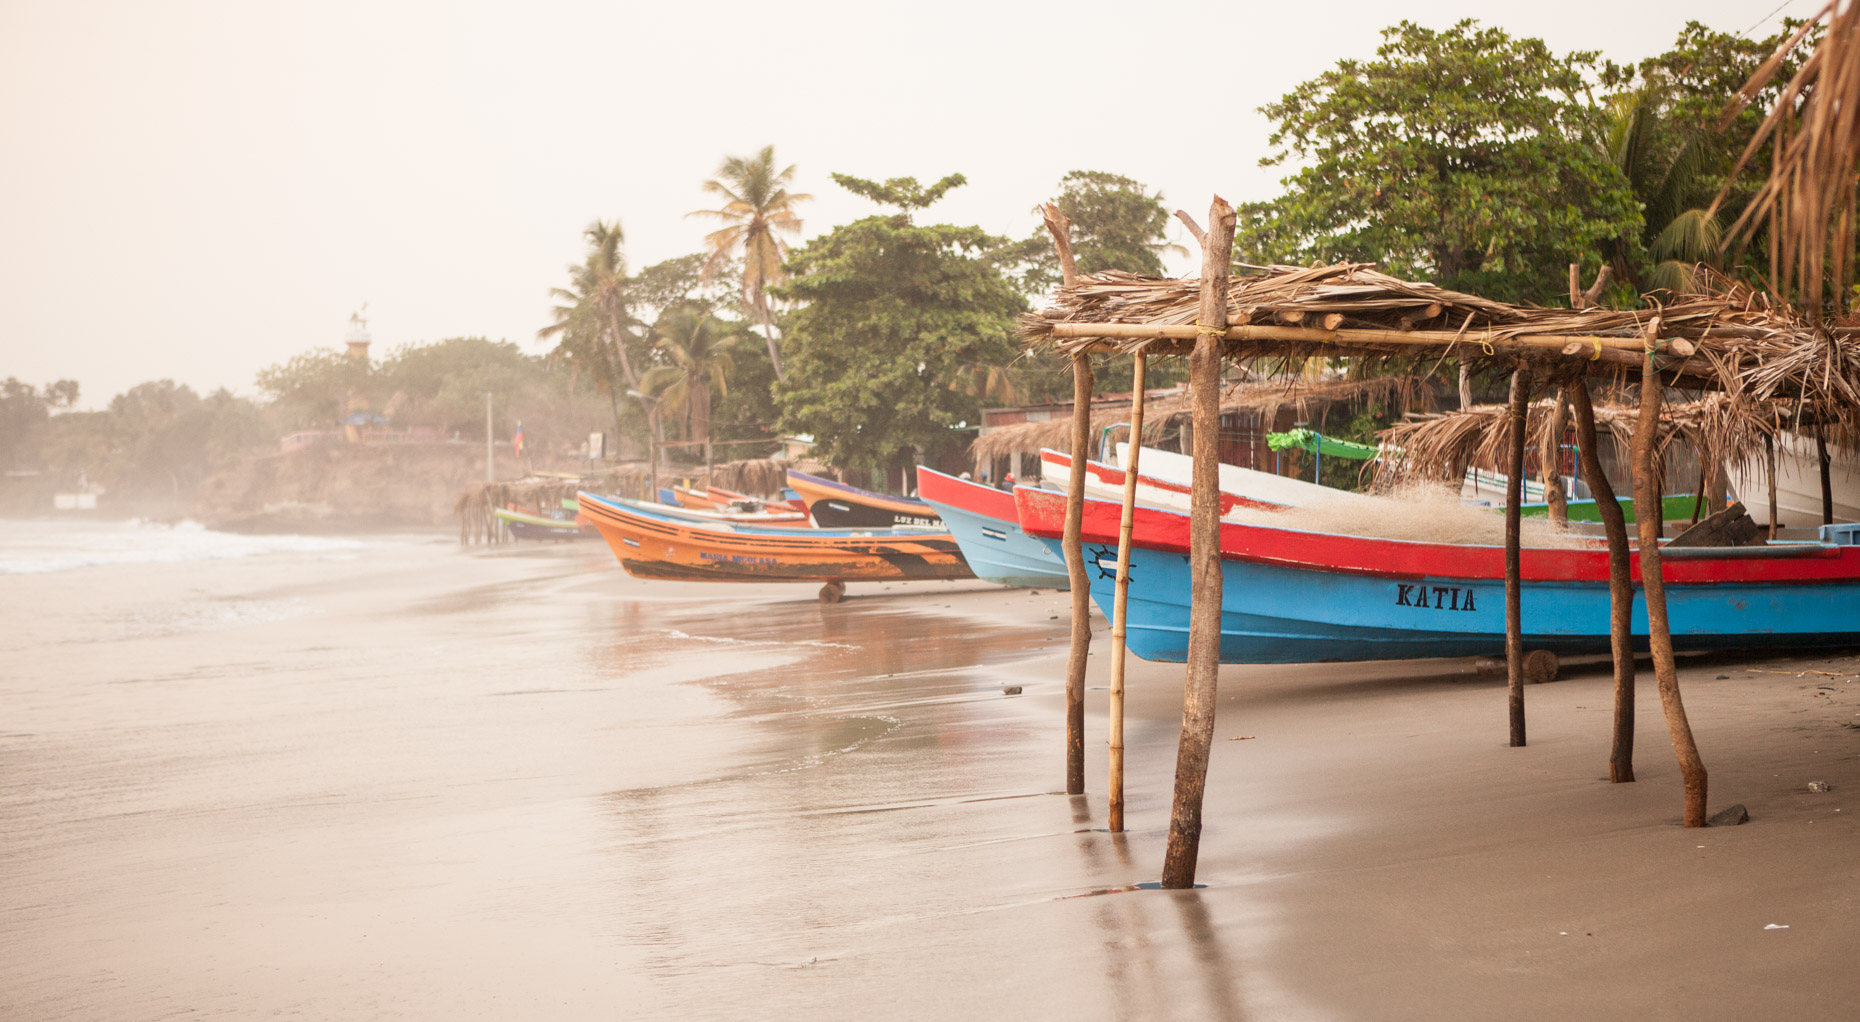 Old Fishing Boats on Beach